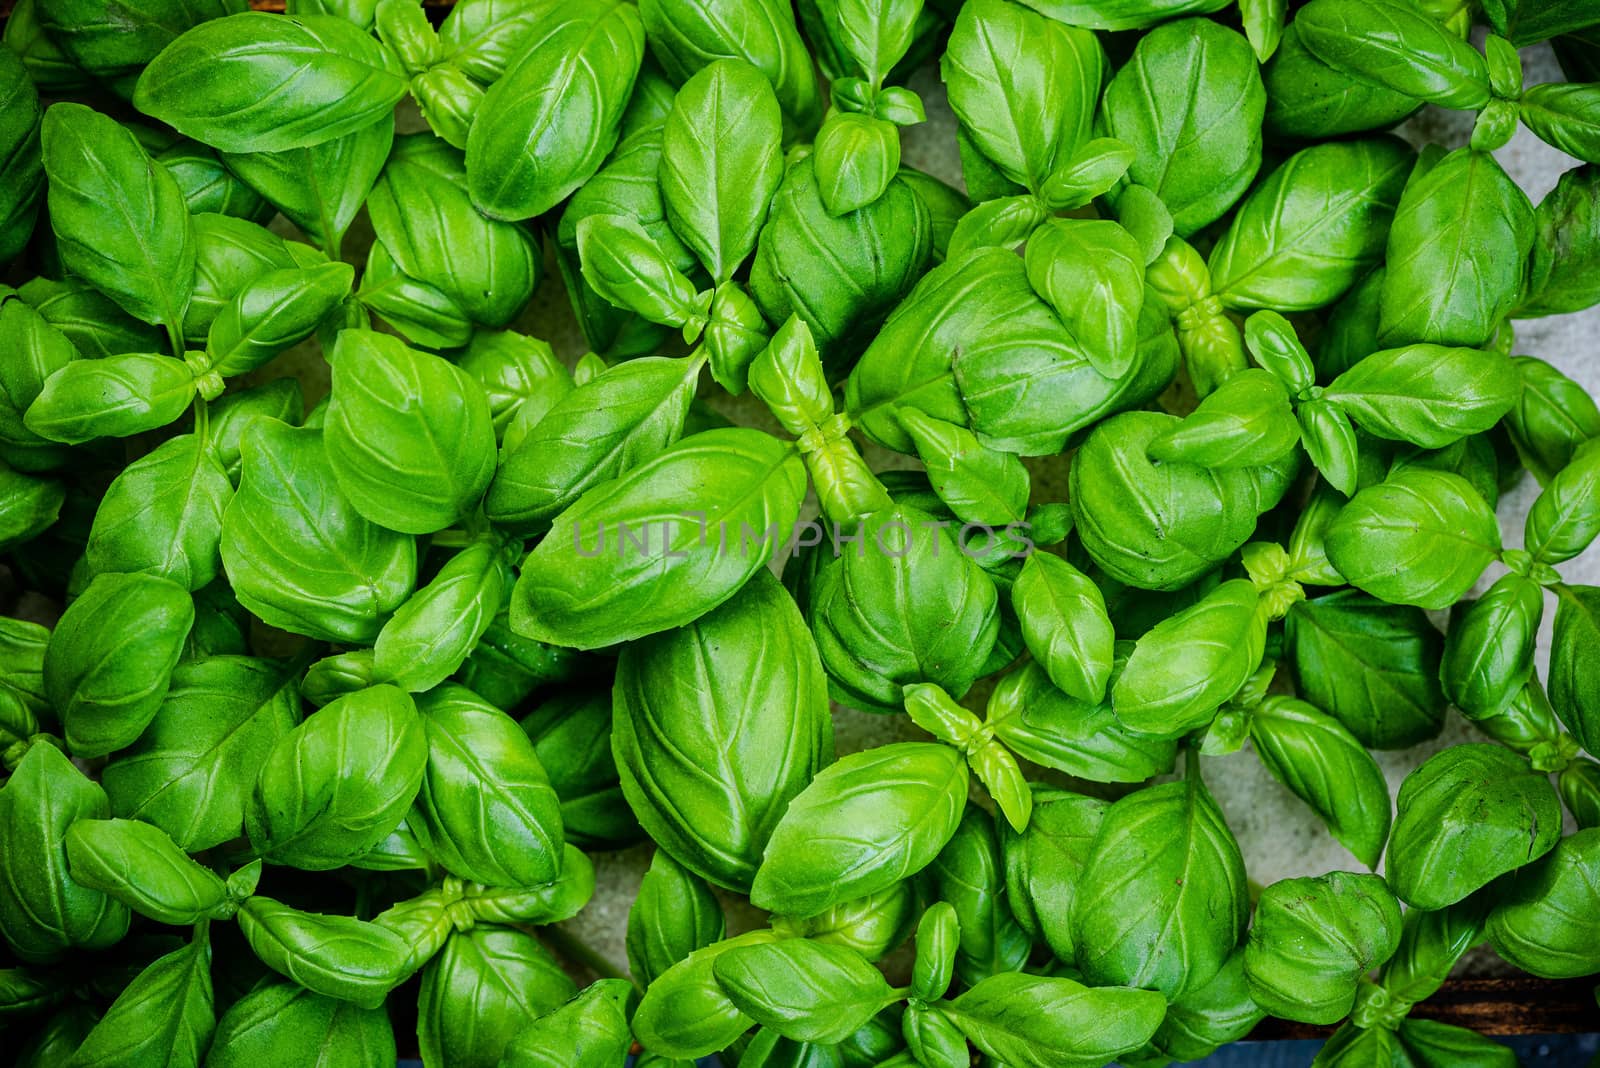 Fresh Basil Herb. Top Down Close Up View. Herb Leaves Texture Detail.